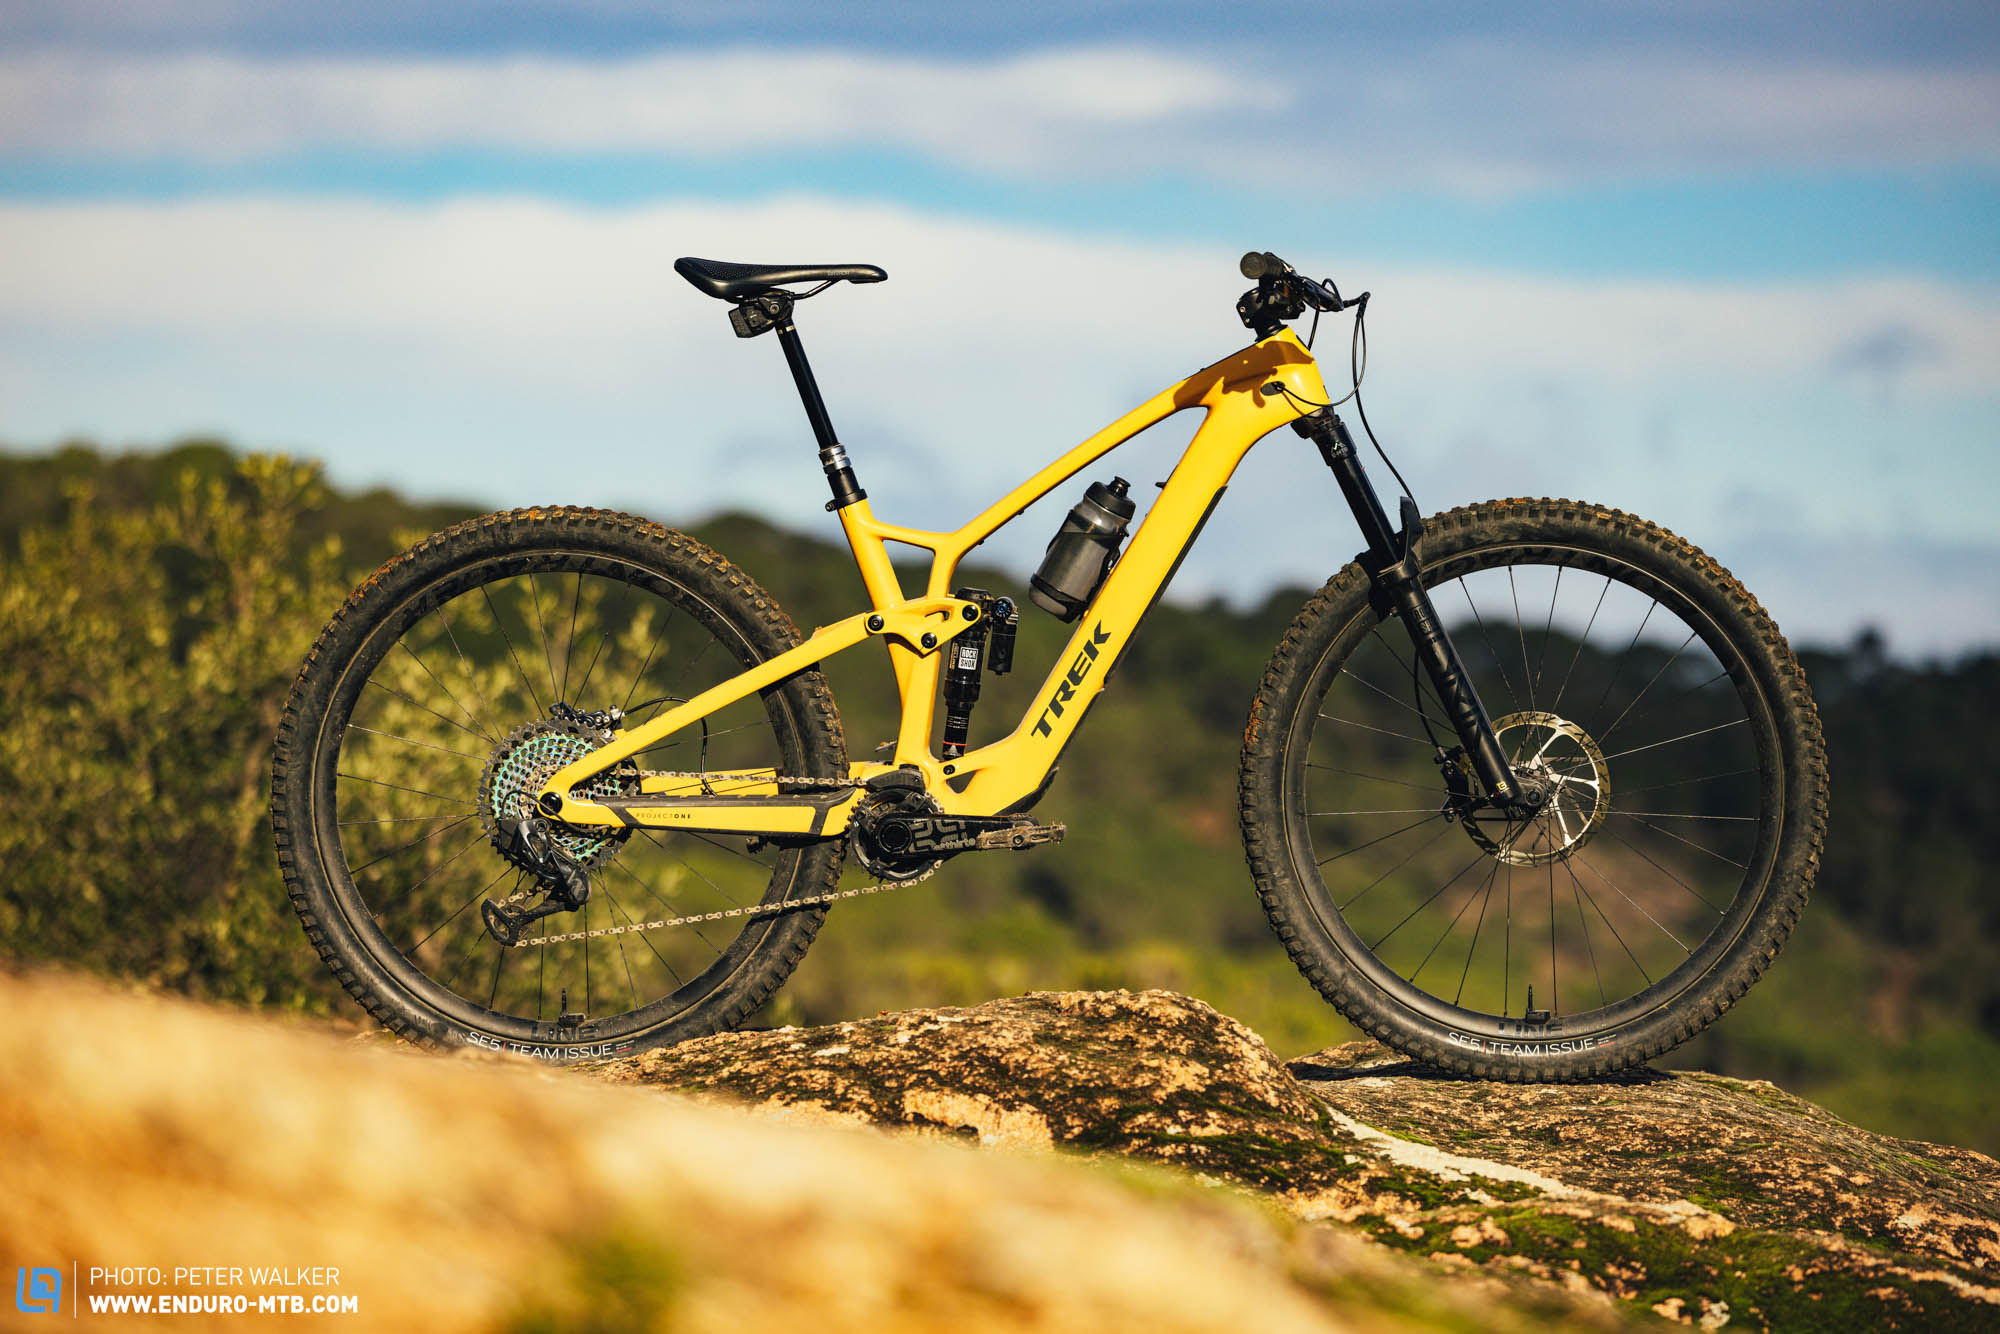 The Trek Fuel EXe 9.9 XX1 AXS – In our big “Best Light-eMTB of 2023” group test